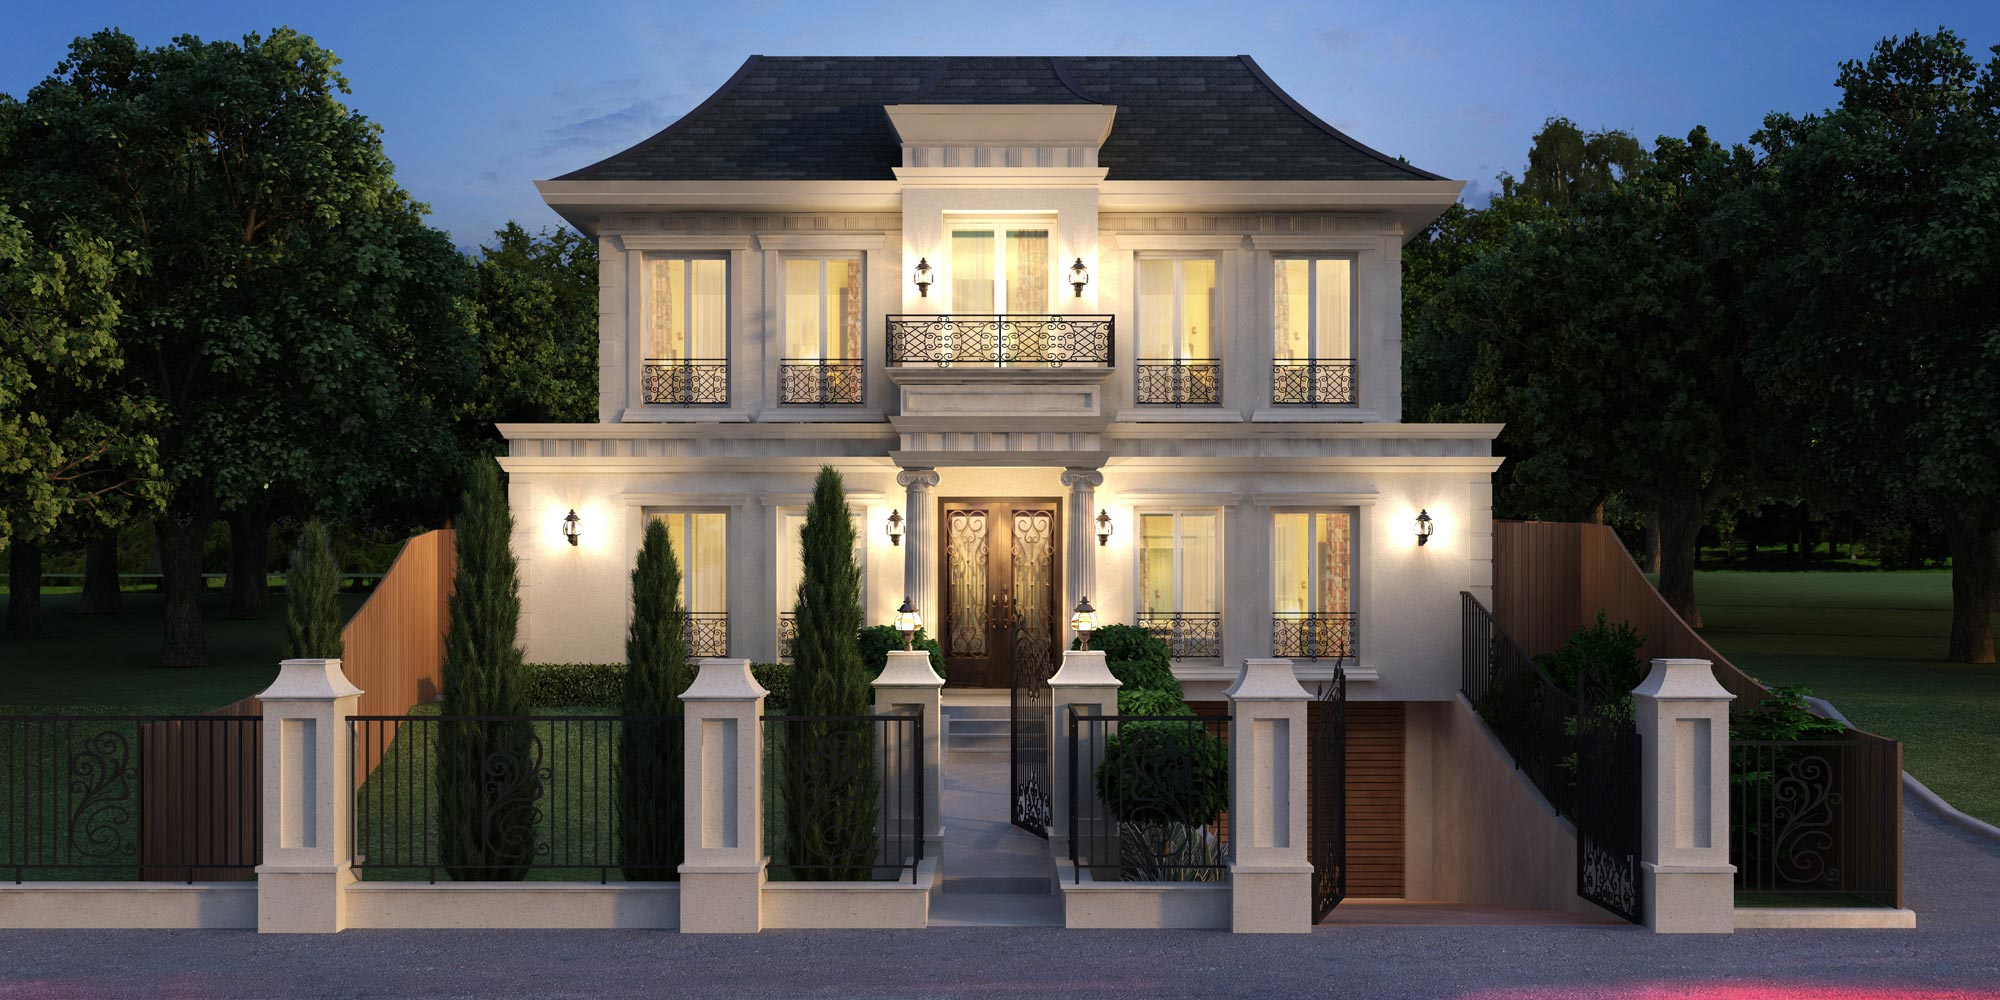 French Provincial Home Architecture